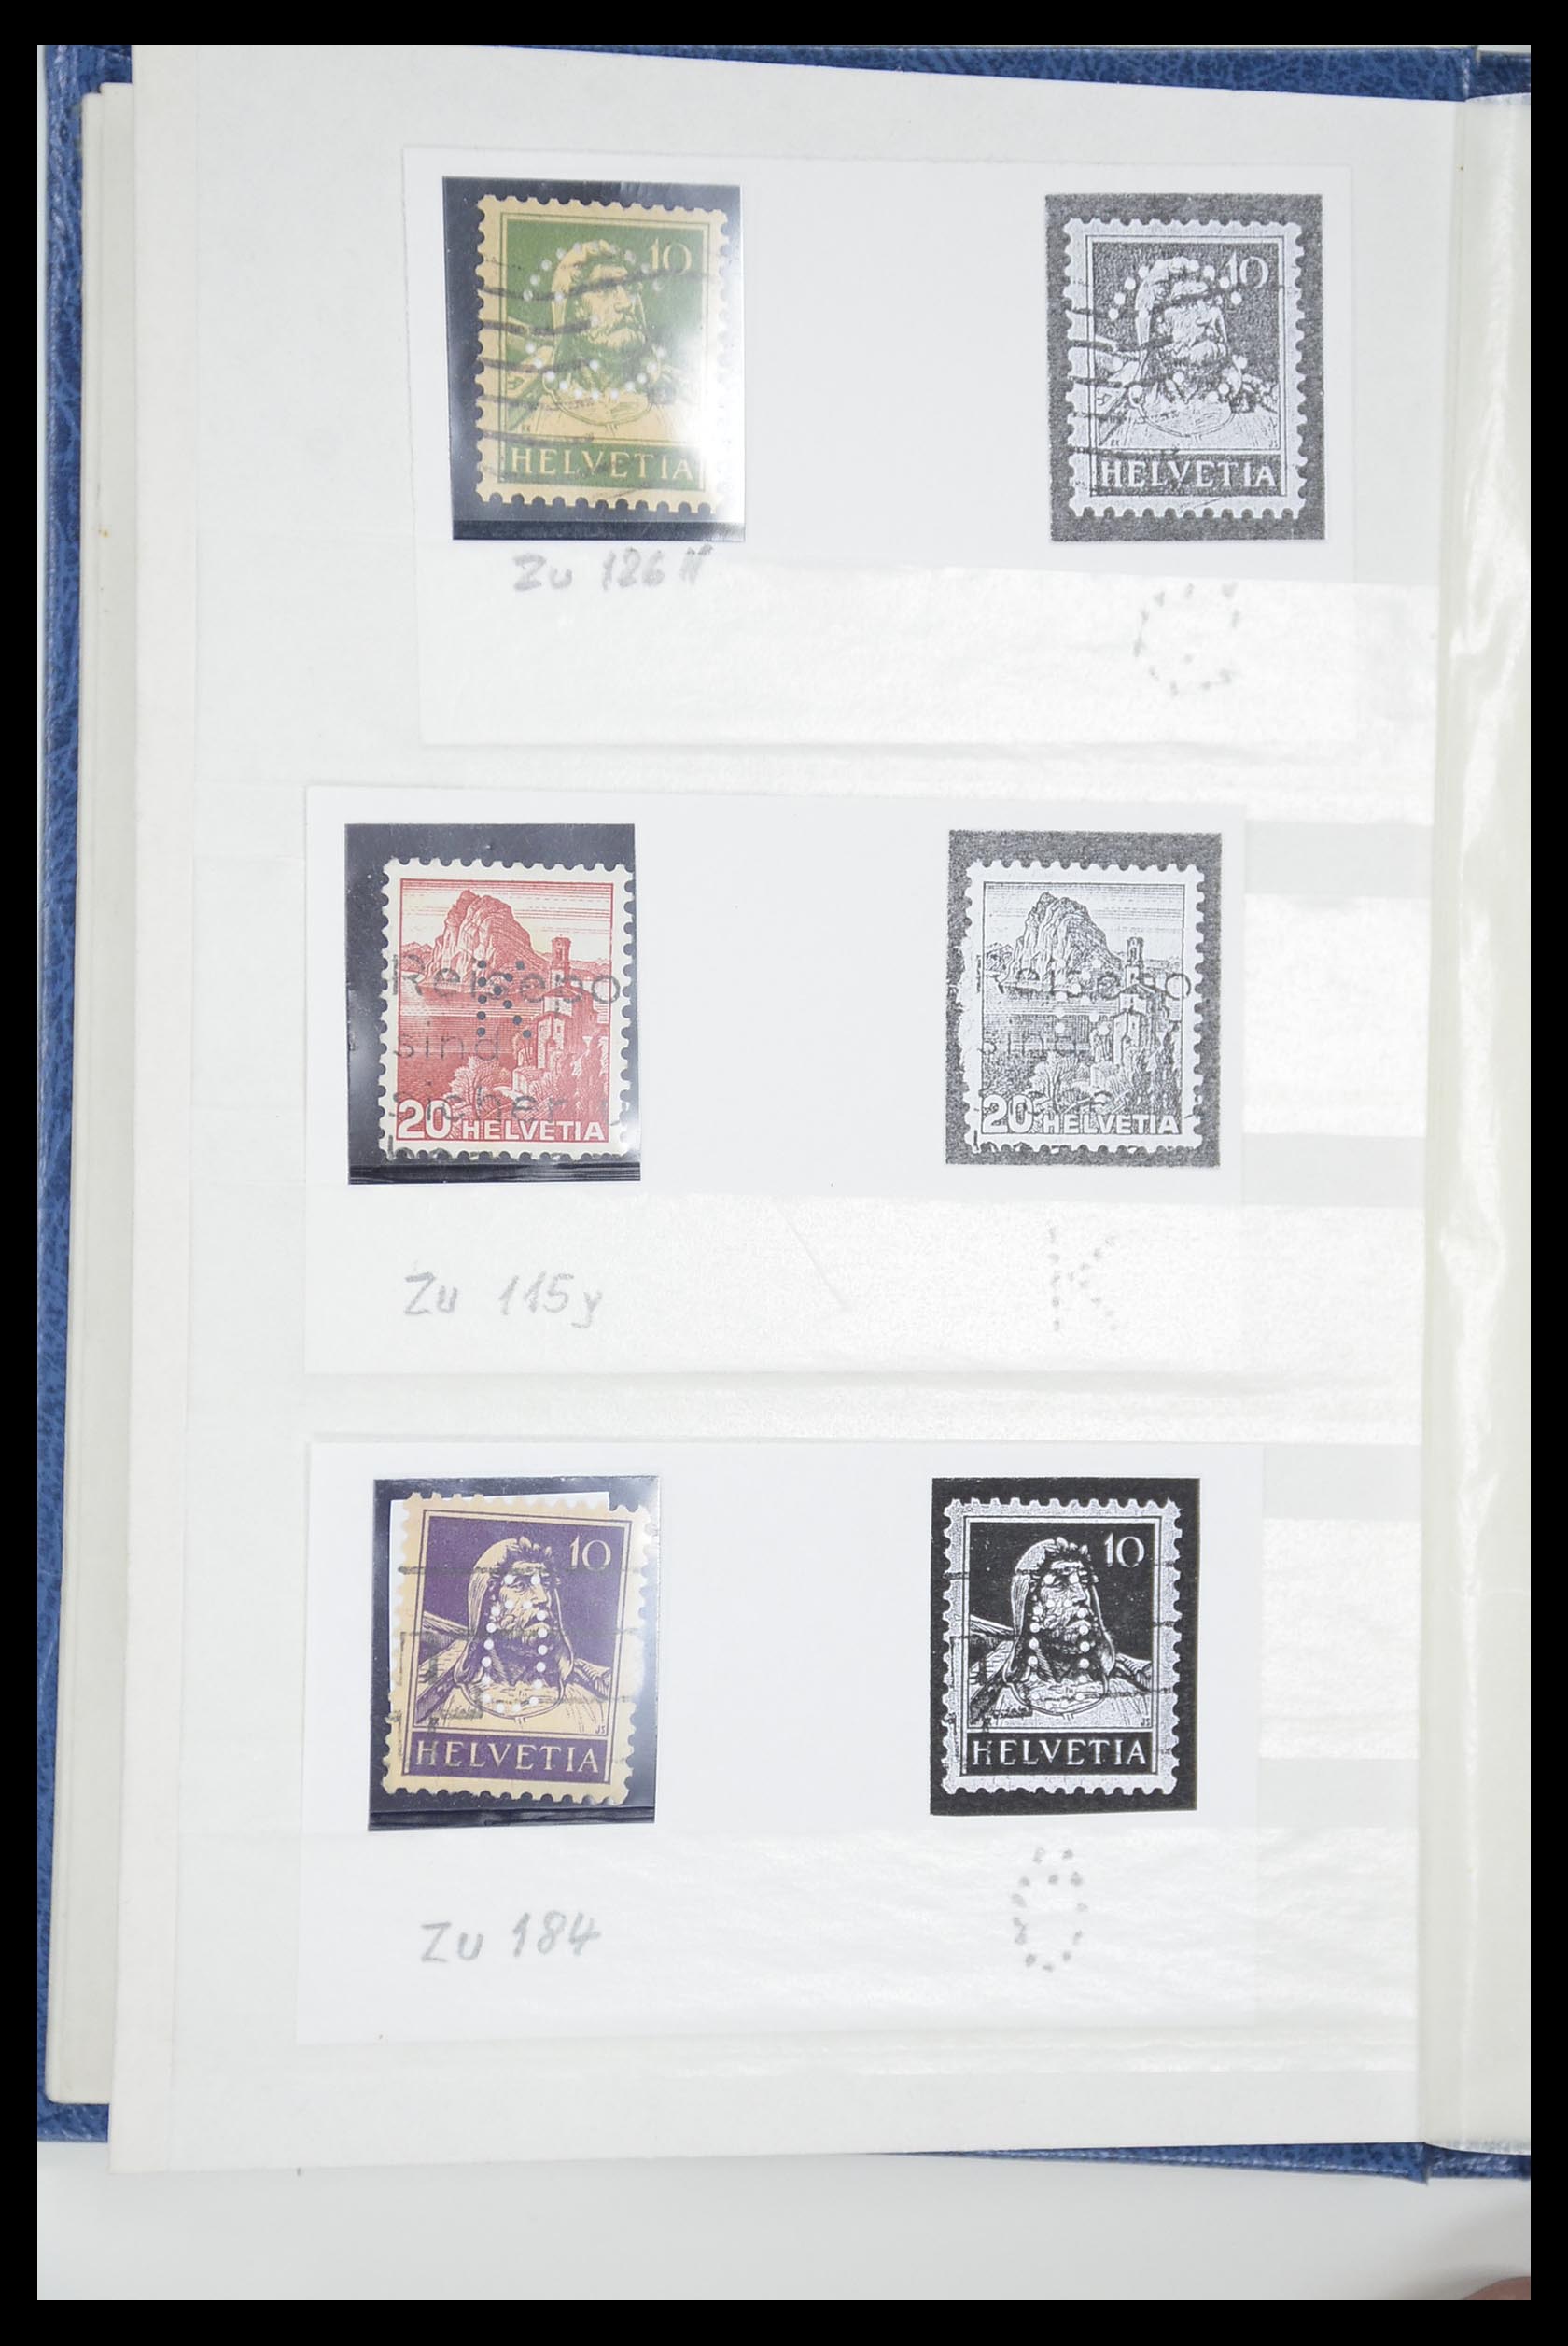 33284 045 - Stamp collection 33284 Switzerland better issues 1900-1995.